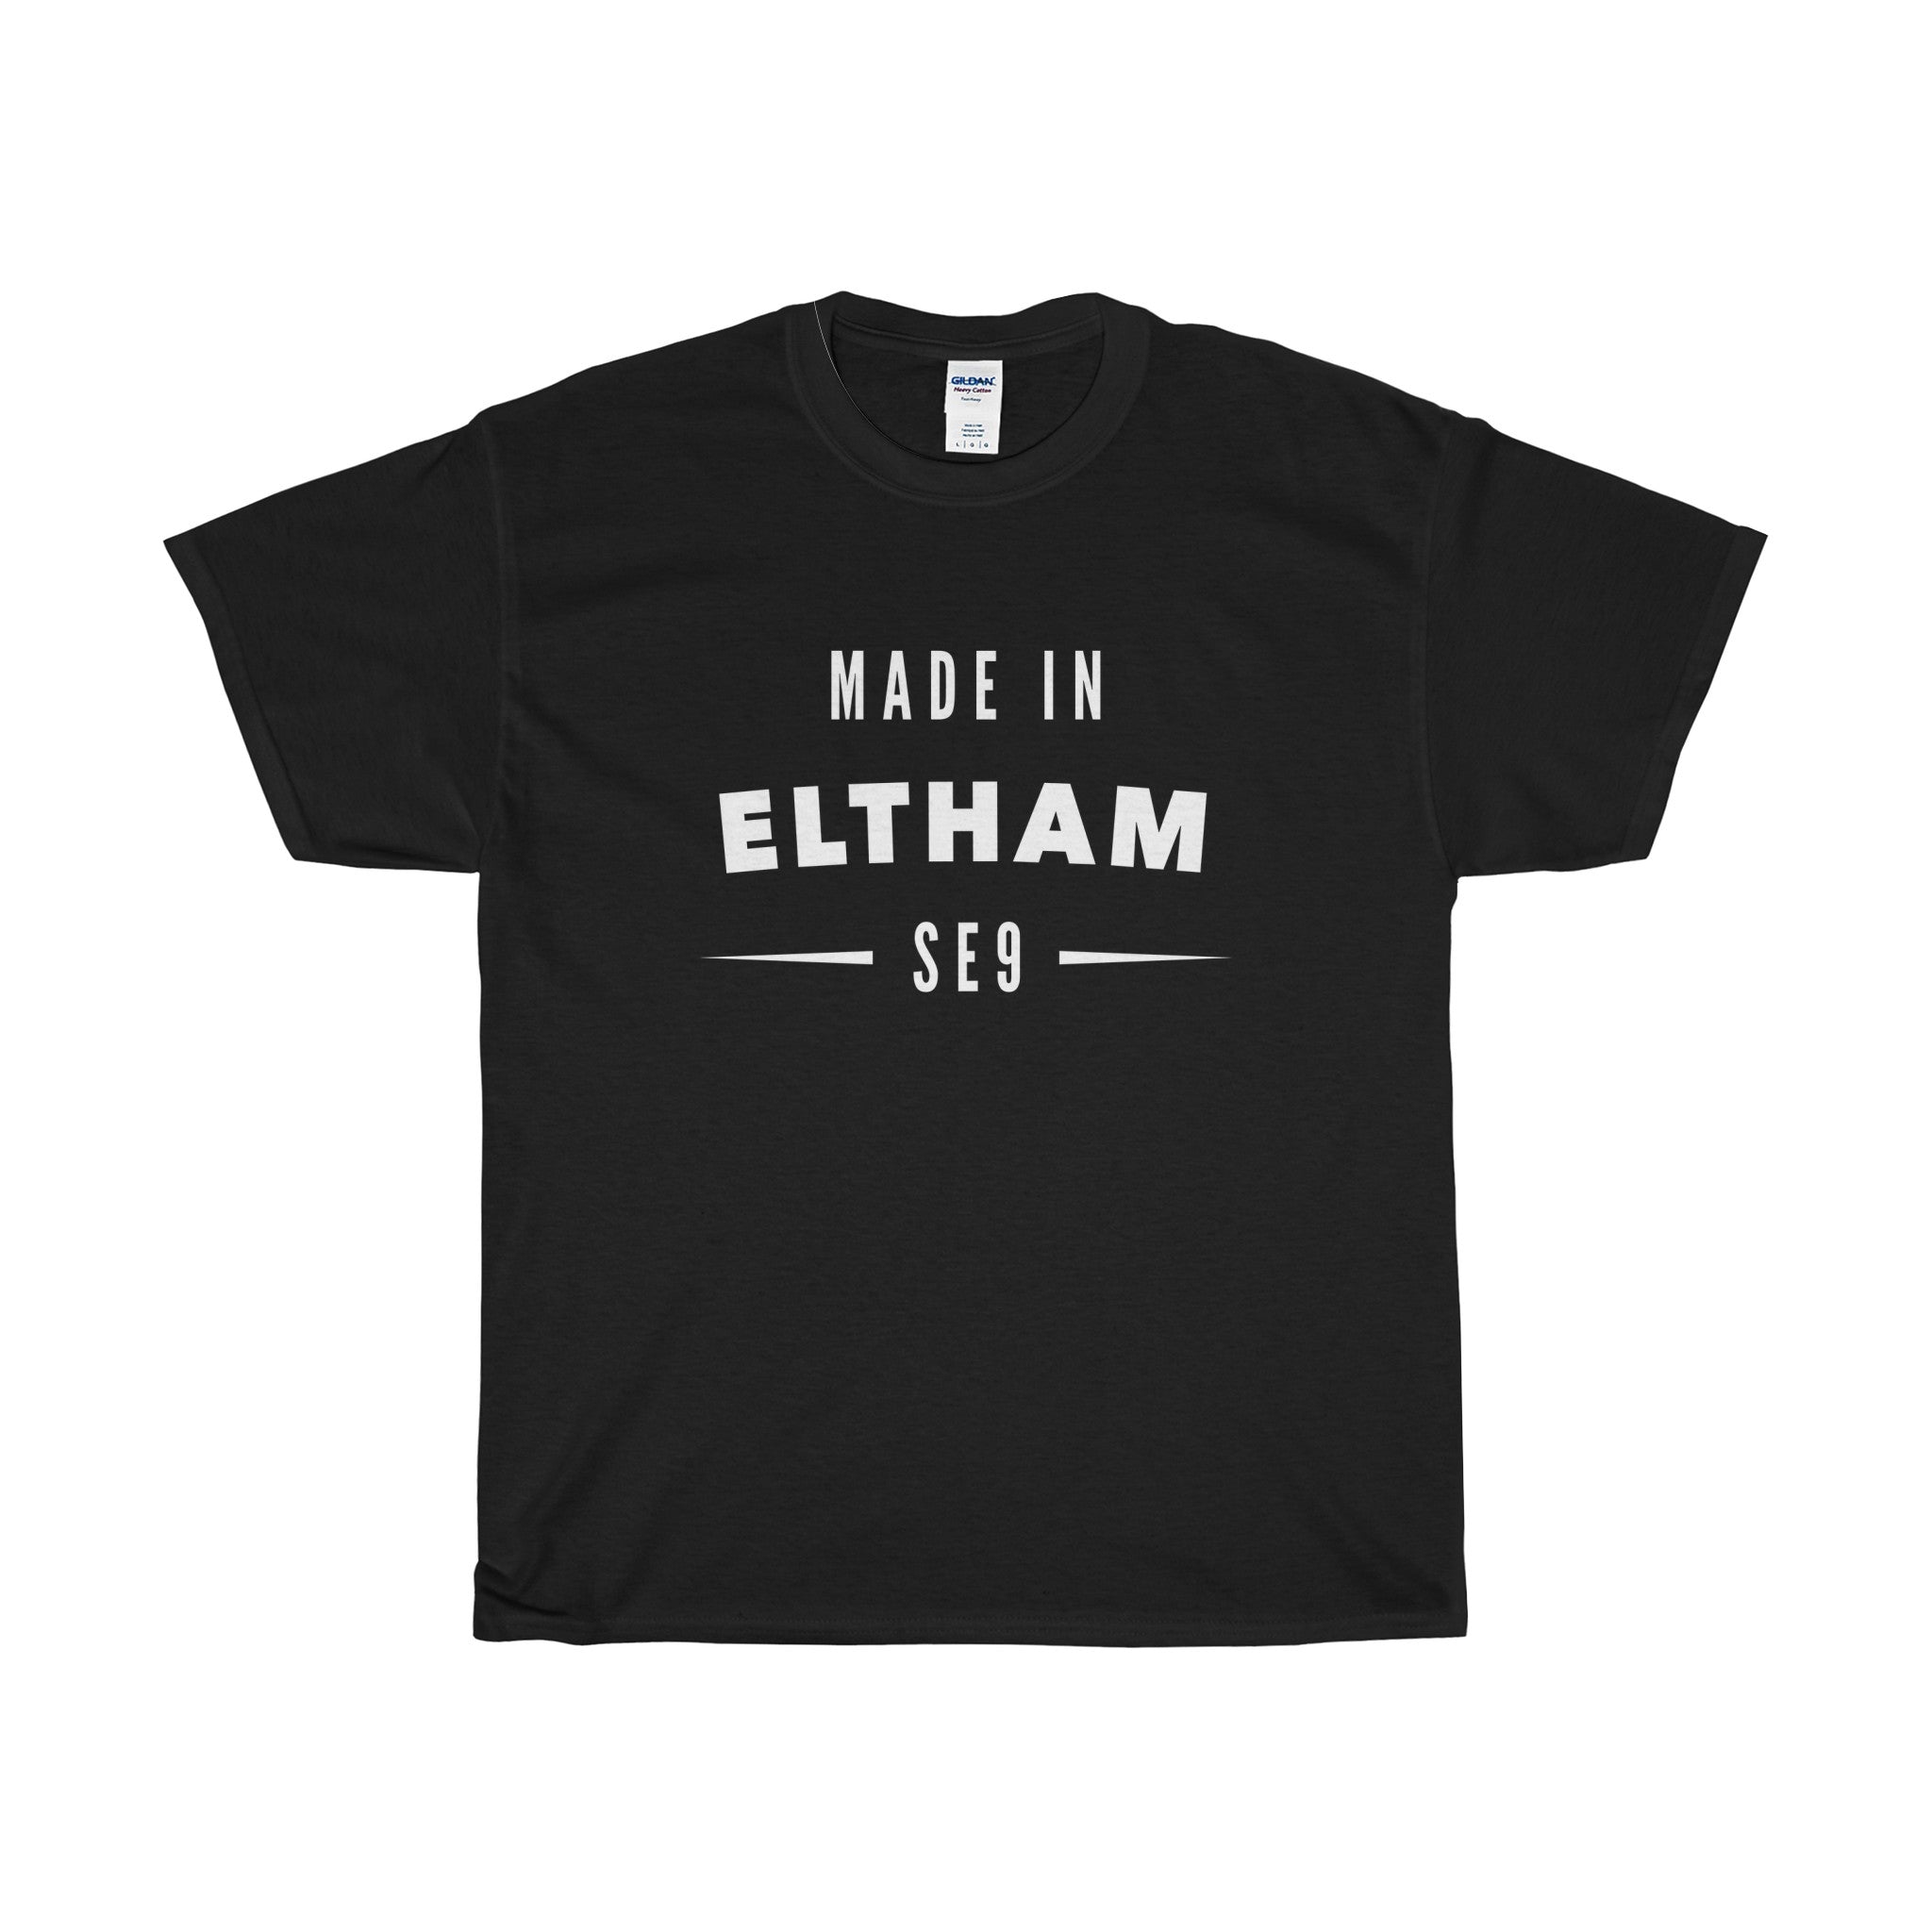 Made In Eltham T-Shirt